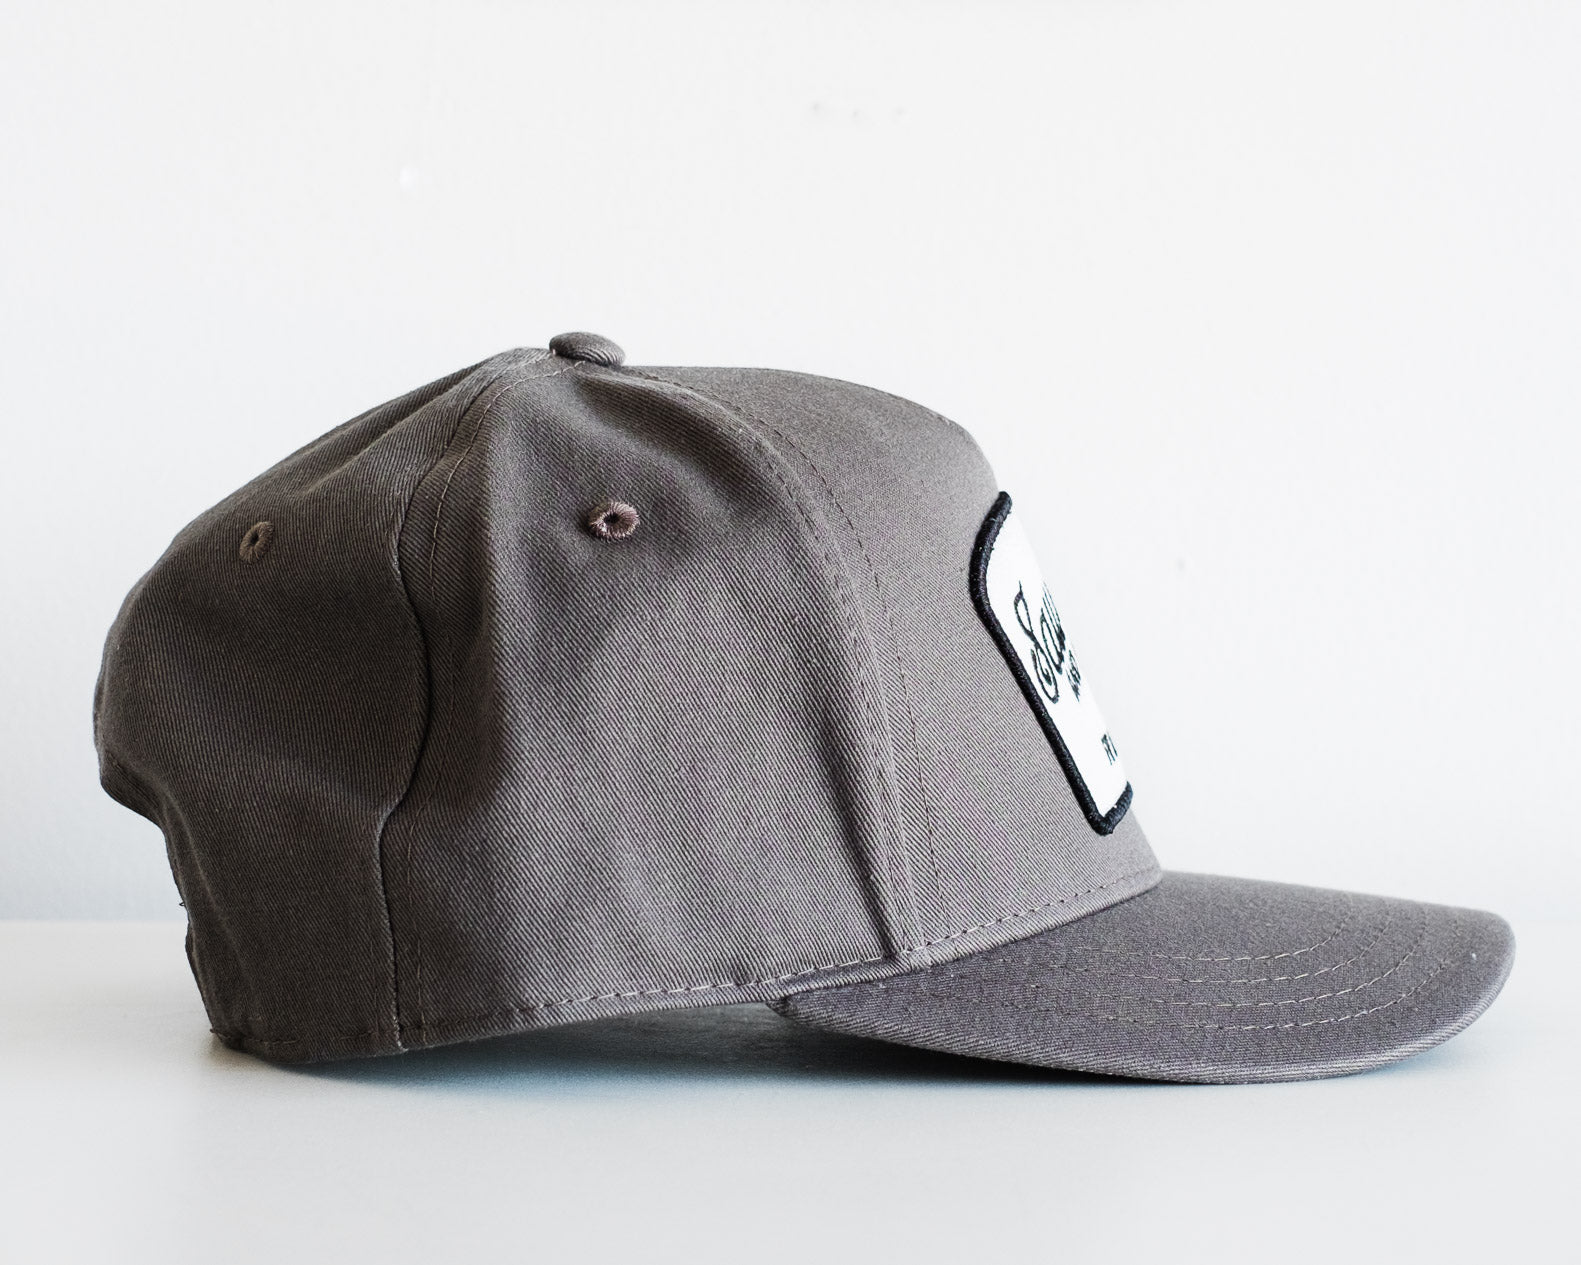 The Cotton Twill Workshop Hat in Charcoal Gray